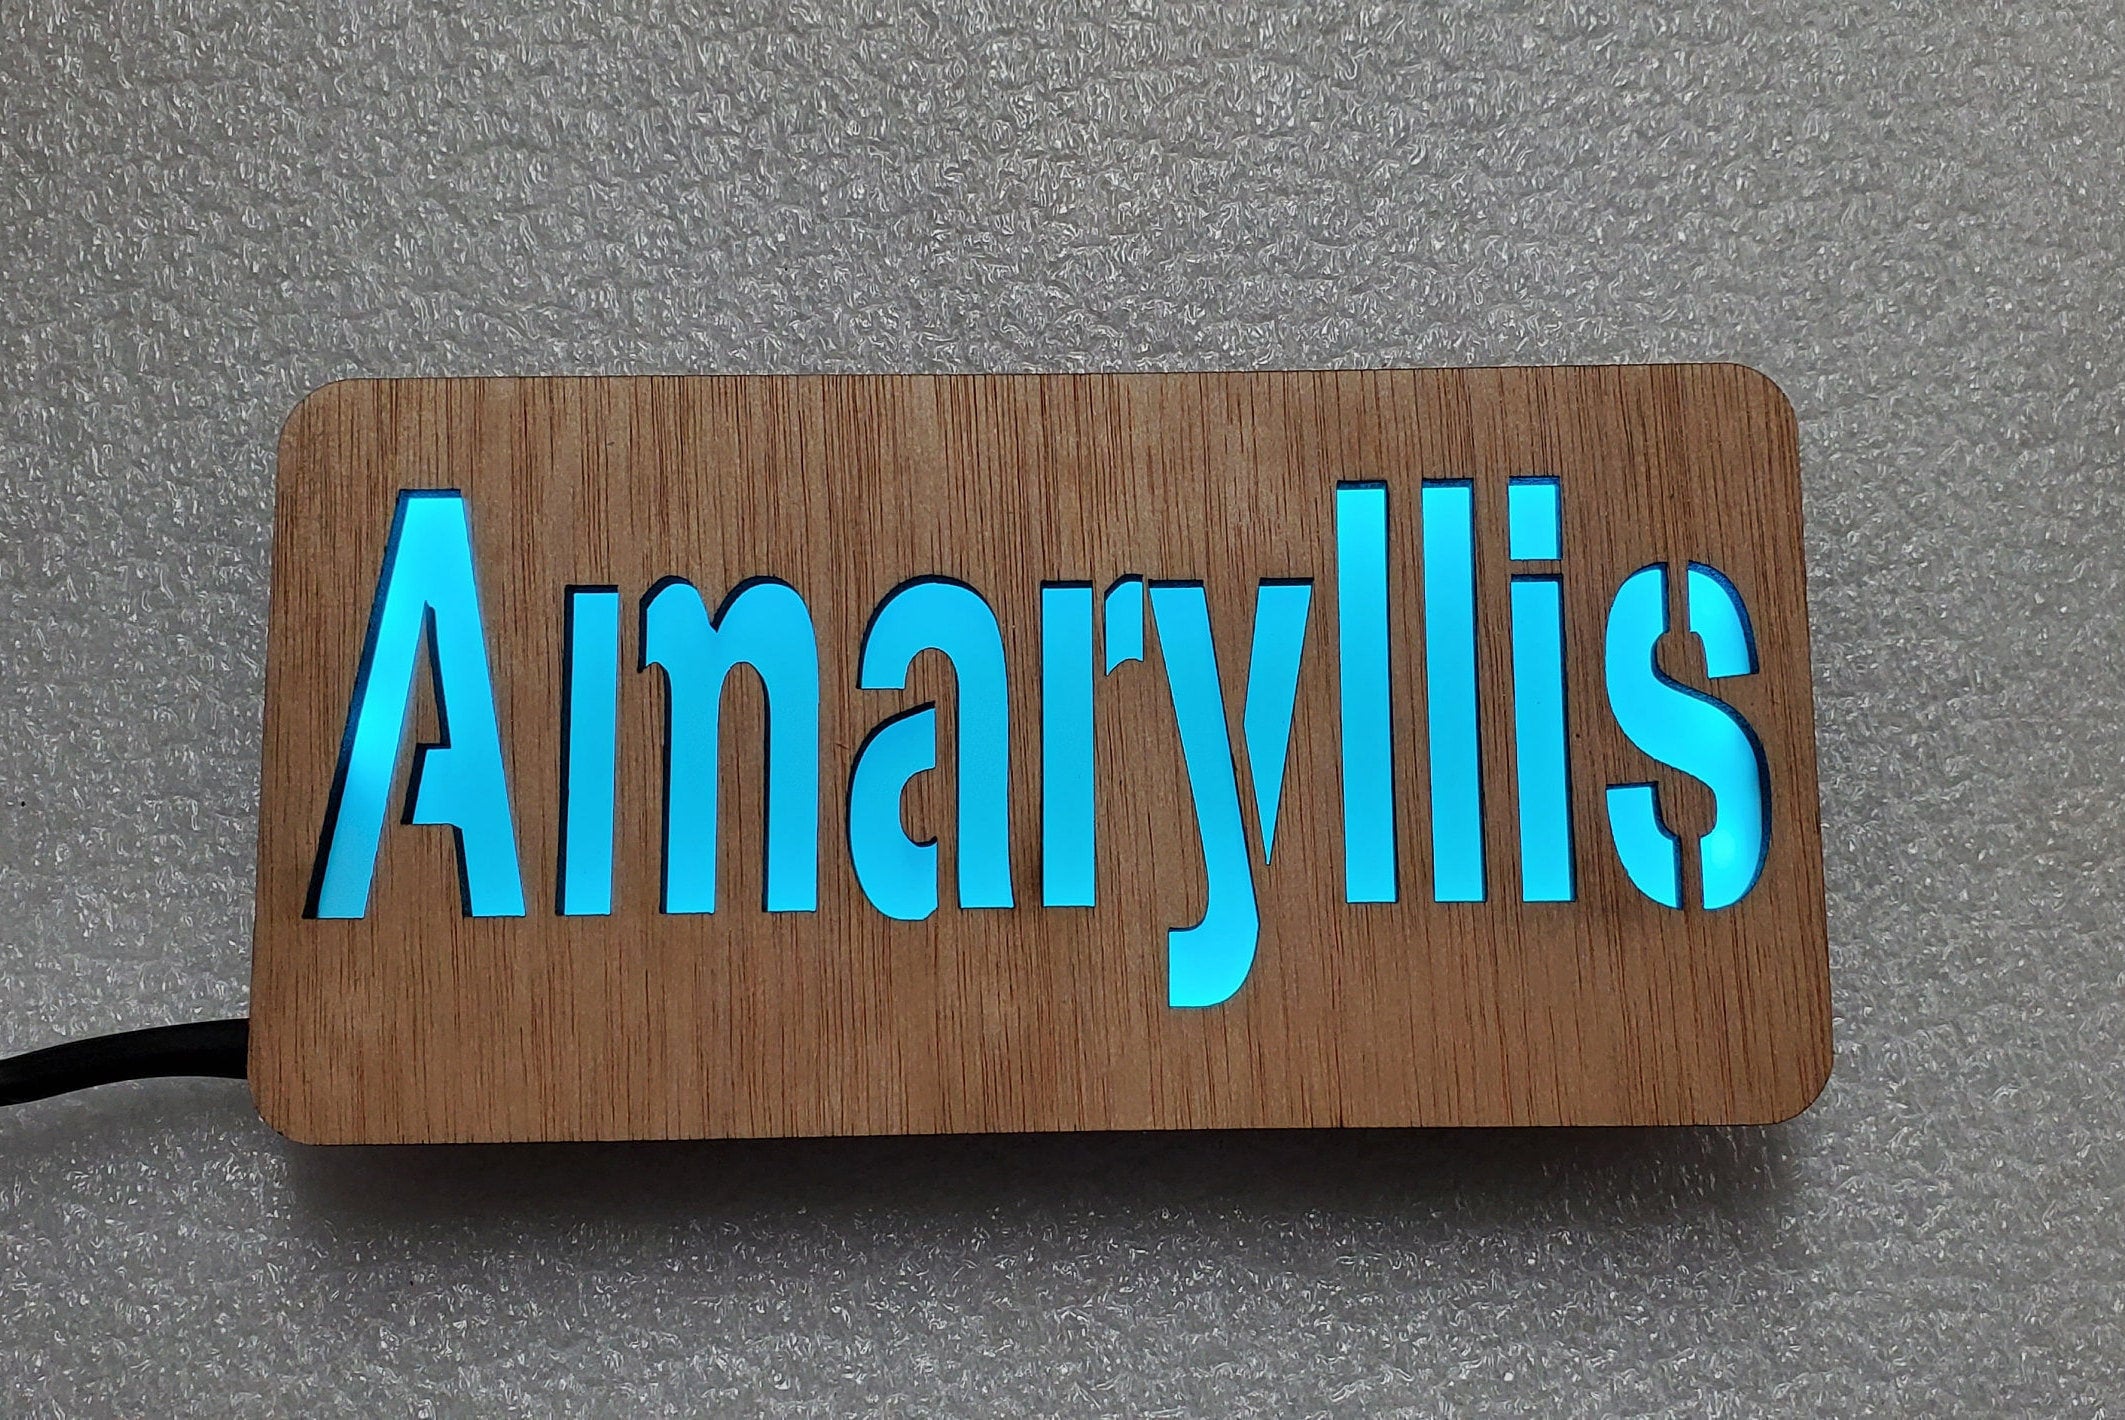 CUSTOM LED Name Laser Cut Color Changing - Desktop or Wall Use - Made in USA - Free and Fast Shipping